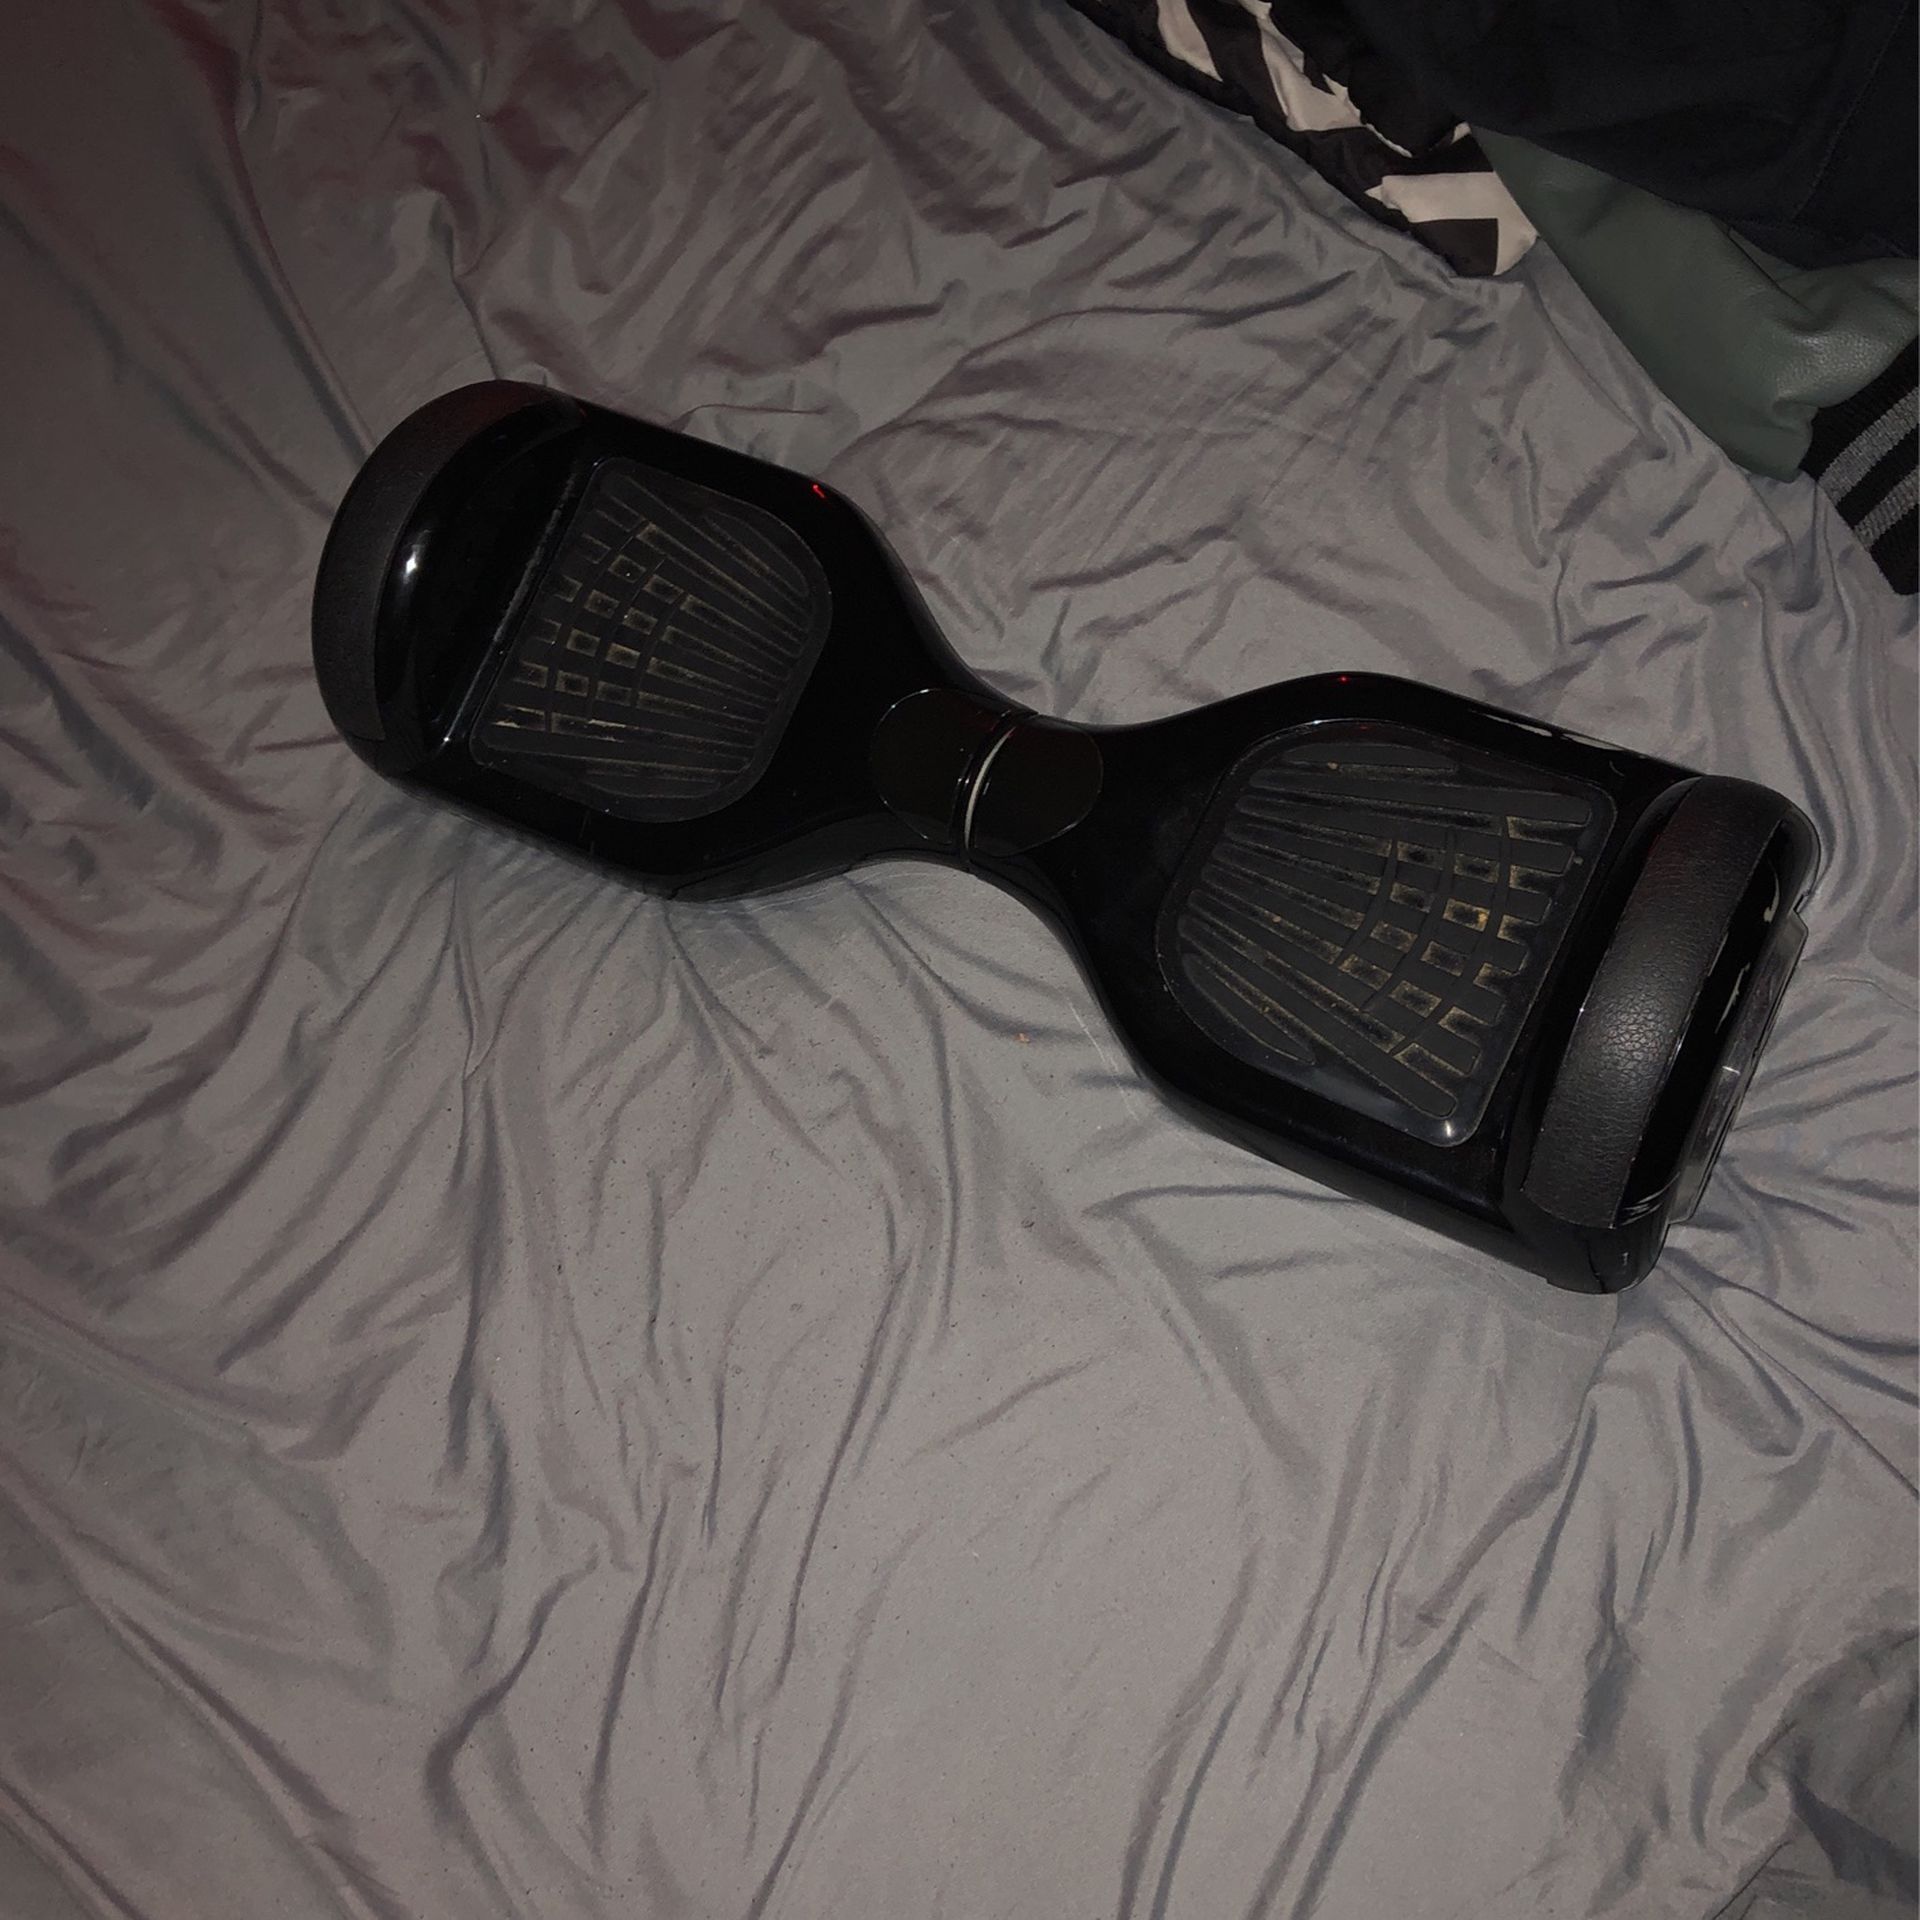 Hoverboard For Sale Need Gone Asap !!